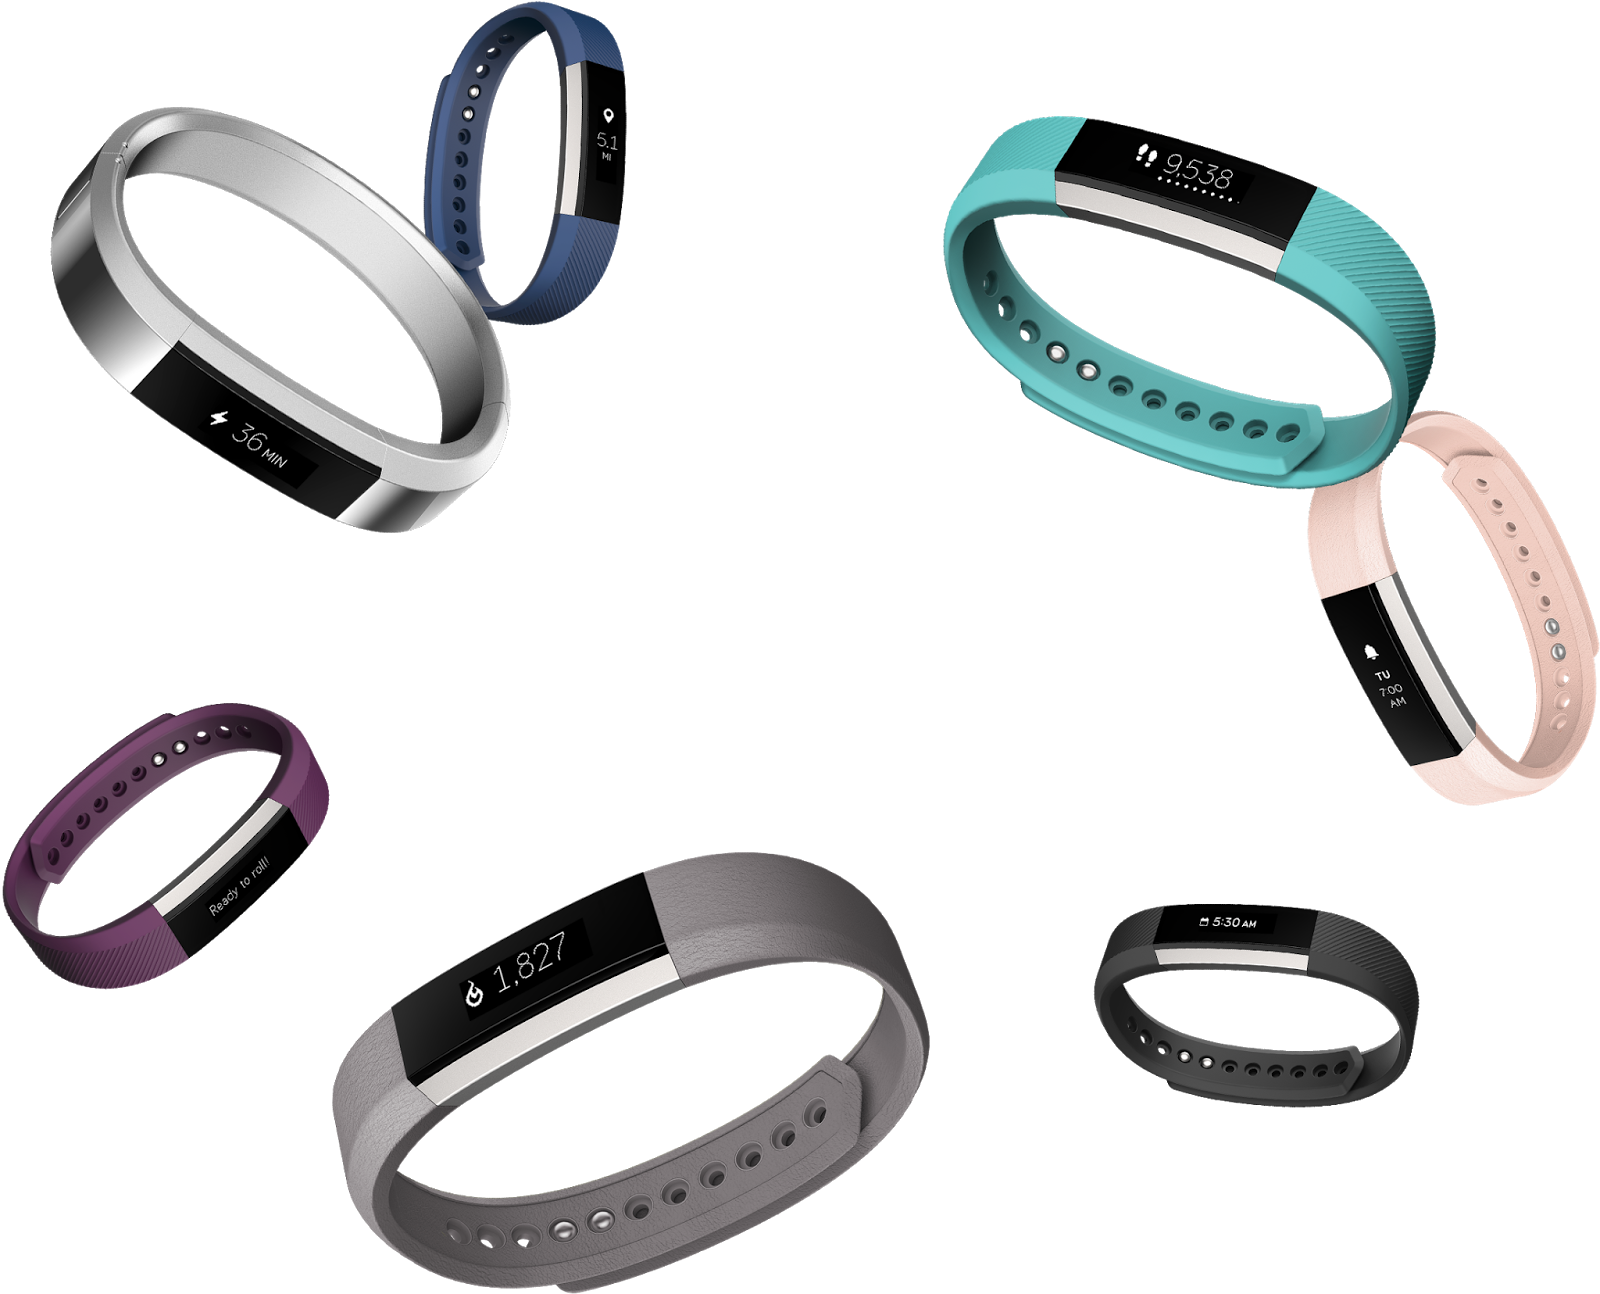 Fibit's new $129 Fitbit Alta is a slimmer and sleeker version of the ...